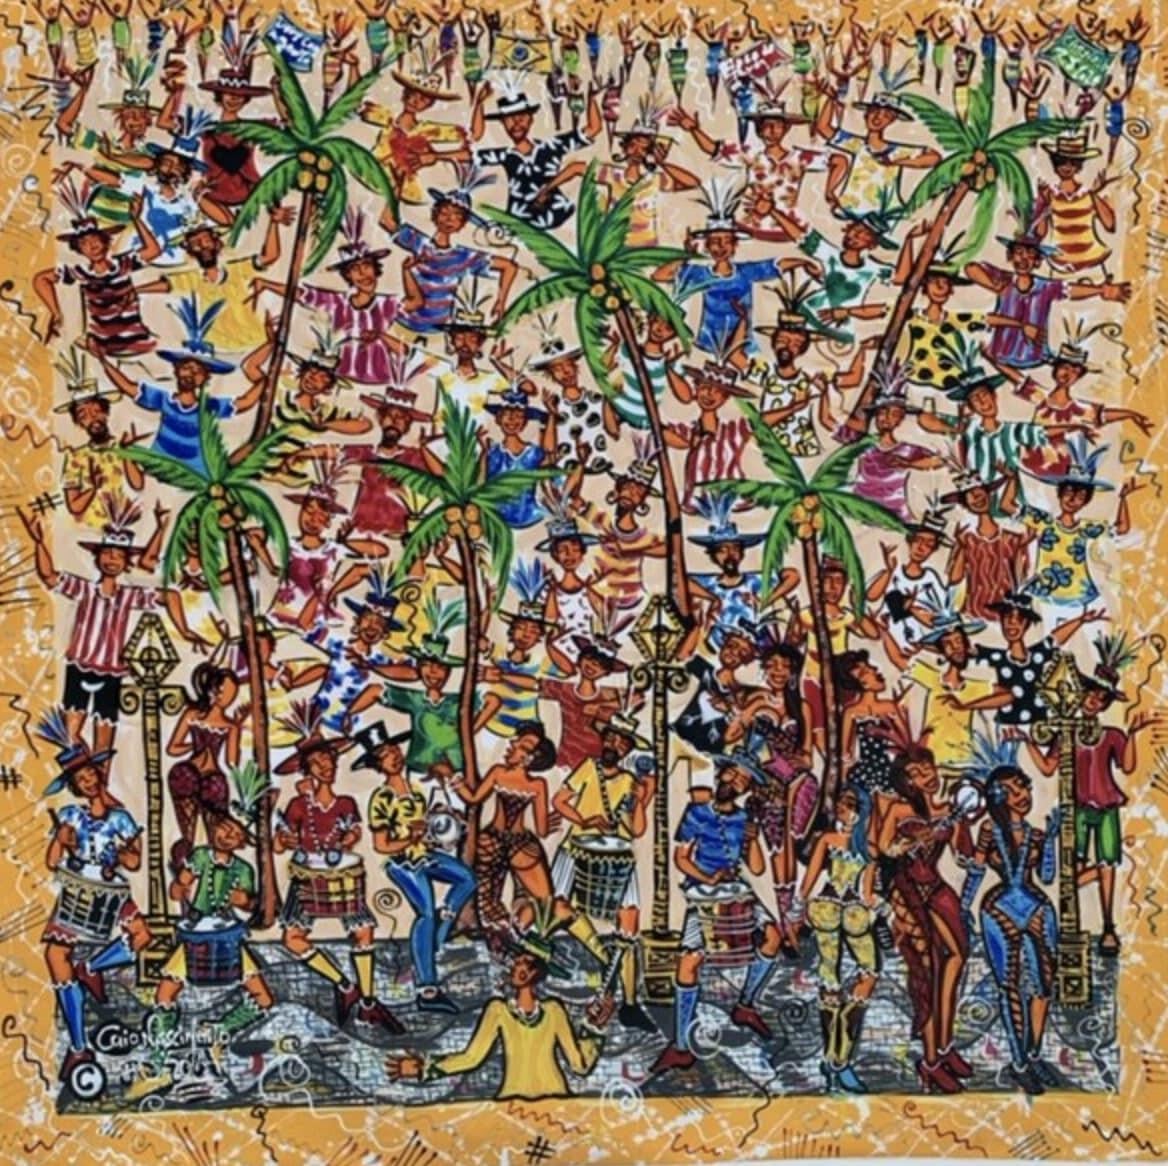 "Carnival, Block on Copacabana Promenade" by Caio Nascimento invites viewers into the heart of a vibrant Brazilian carnival, pulsating with life and energy. This piece presents a dynamic and bustling scene bursting with the exuberance of the